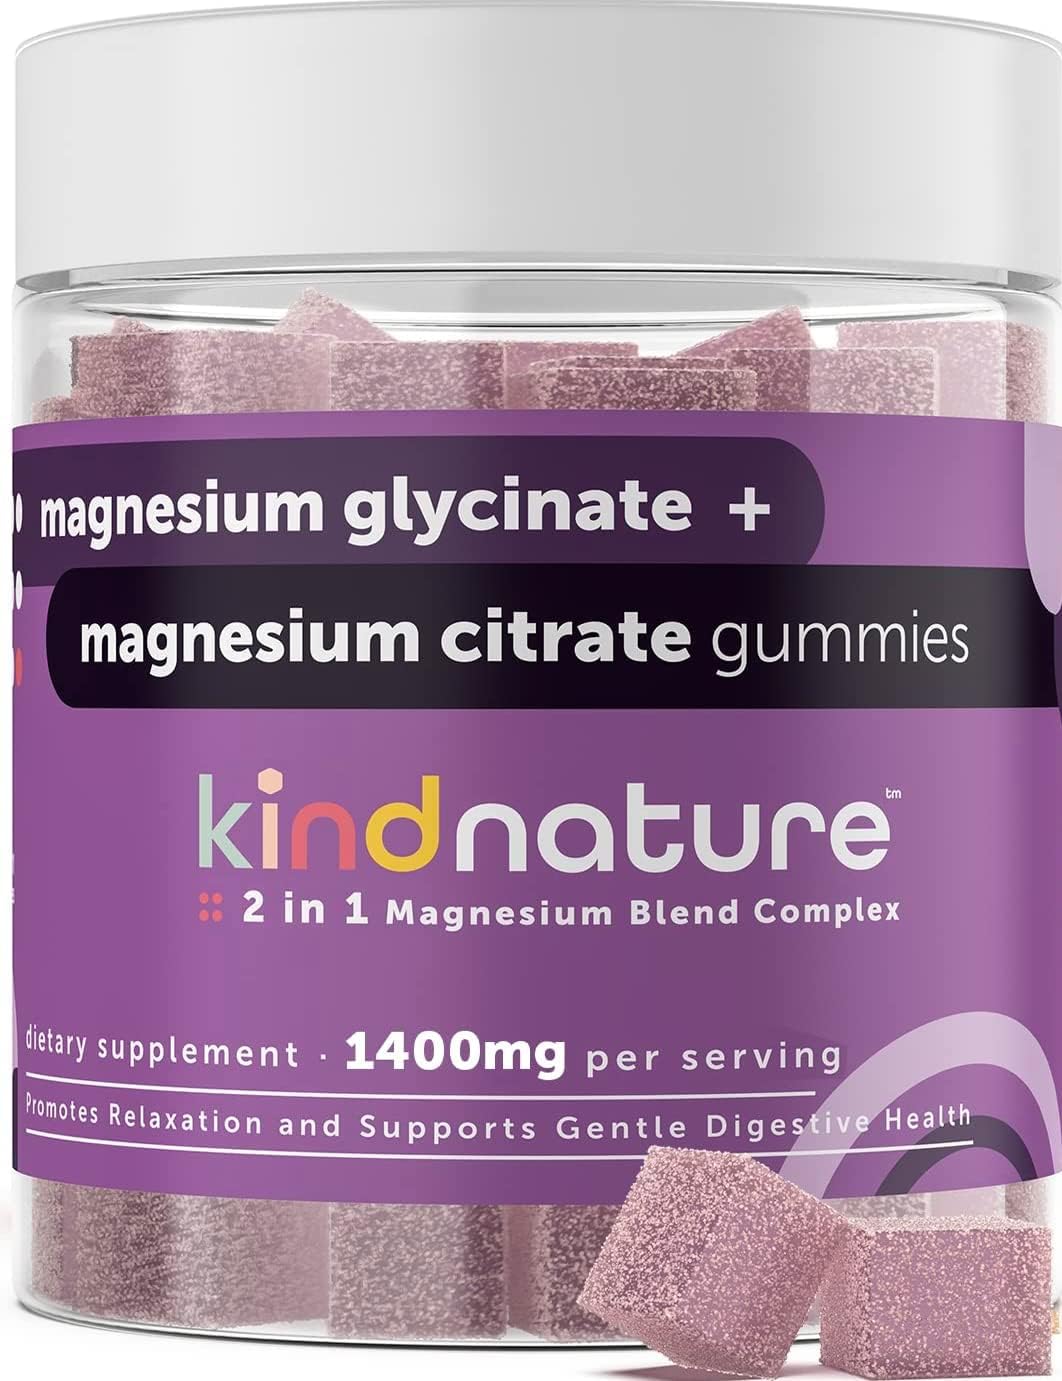 Kind Nature 2-in-1 Magnesium Gummies - 1000mg Magnesium Citrate Gummies 400mg Magnesium Glycinate Gummies for Kids Adults - High Absorption Magnesium Complex Supplement for Calm Sleep Support